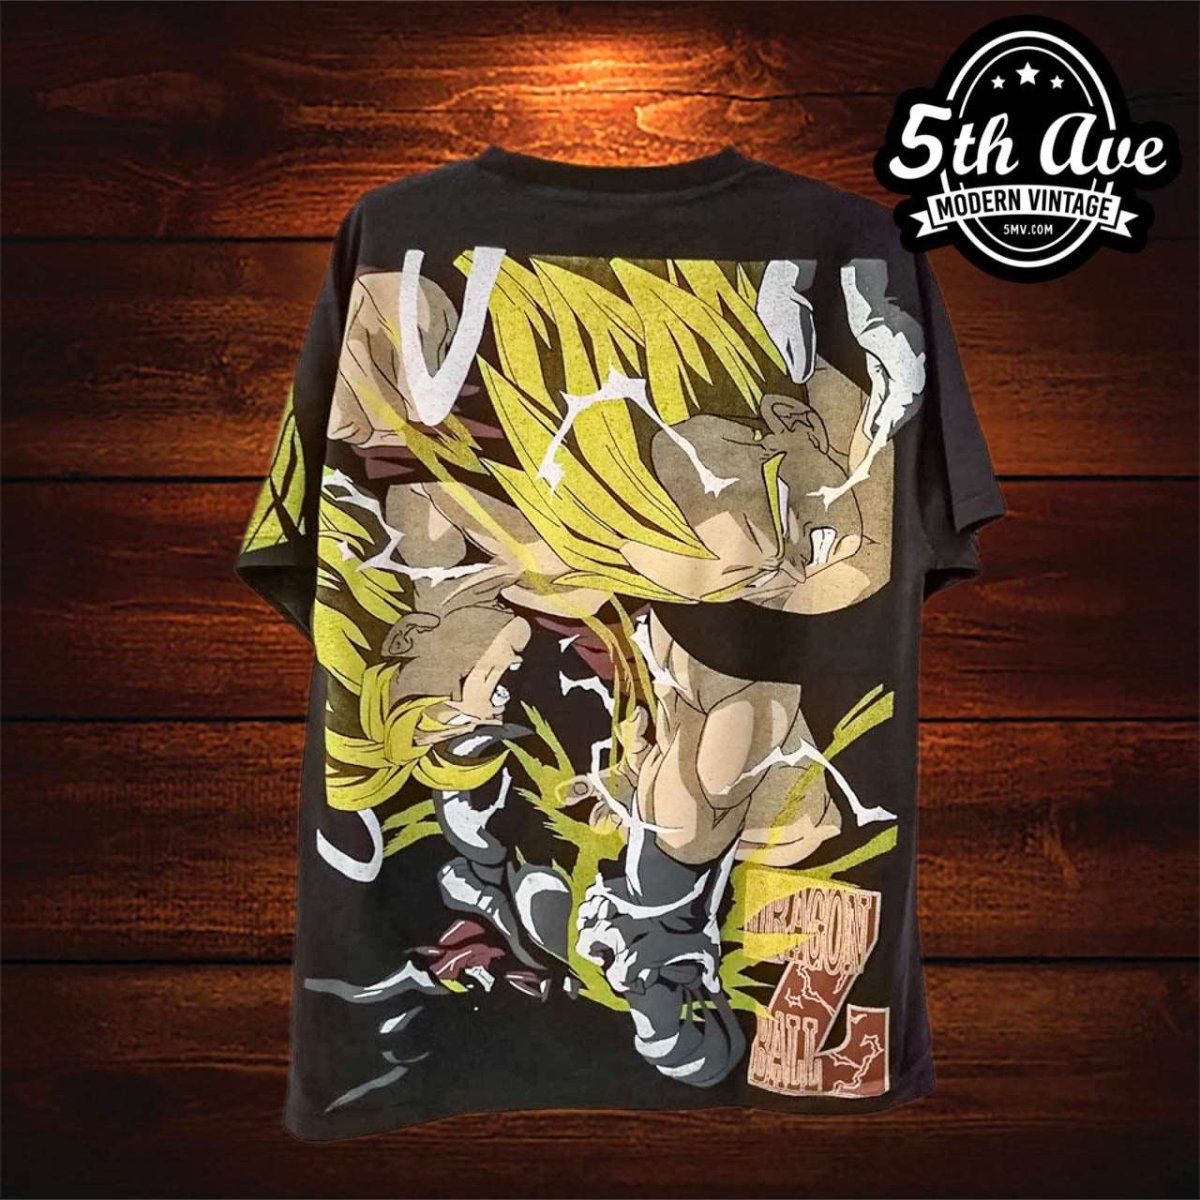 Unleashed Power: Goku's Evolution and Eternal Rivalry - Vintage Band Shirts